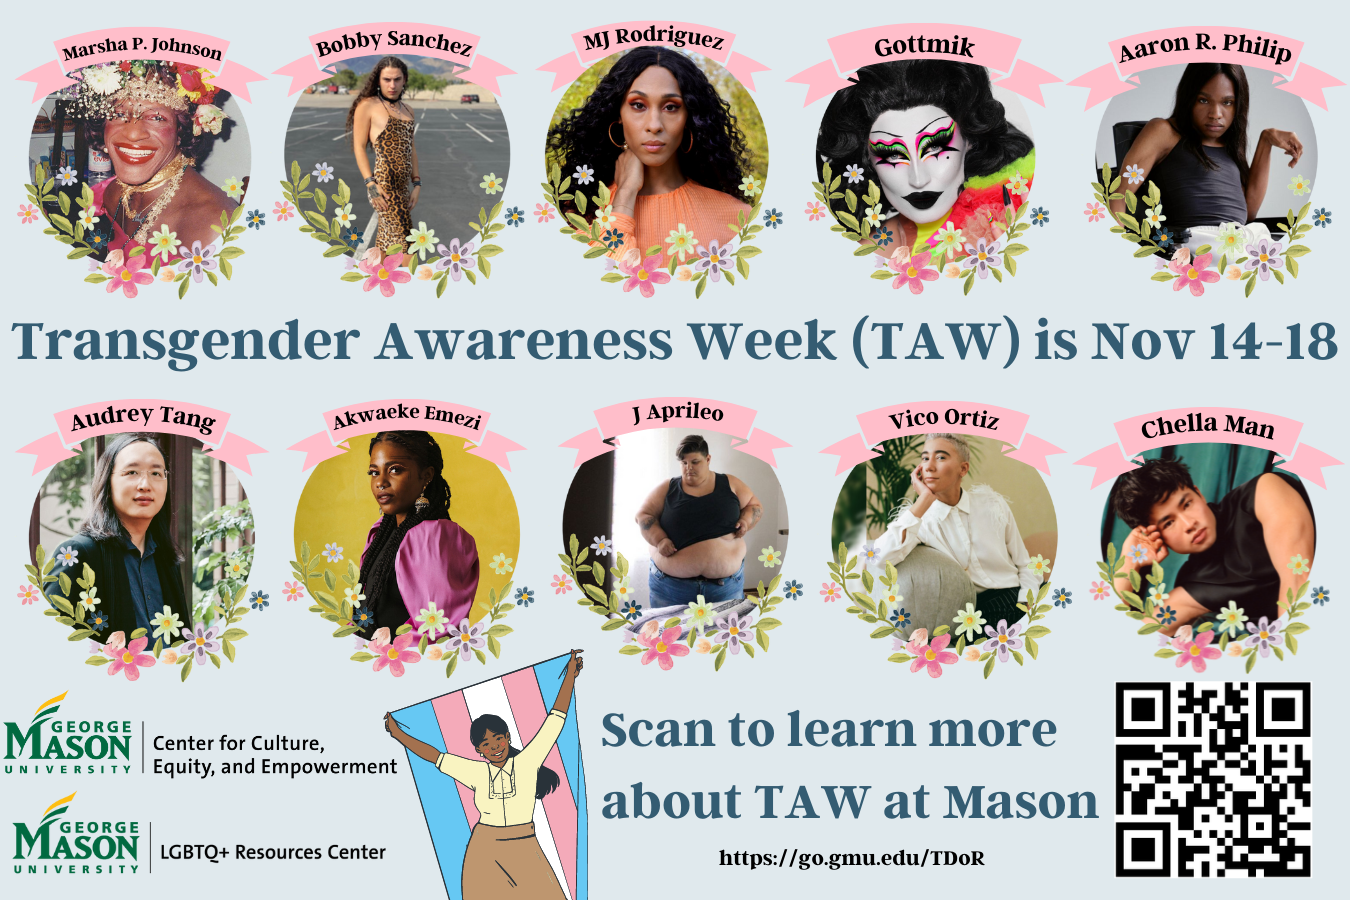 During Transgender Awareness Week (November 14-18), we are highlighting 10 trans and non-binary activists and advocates, pictured here.